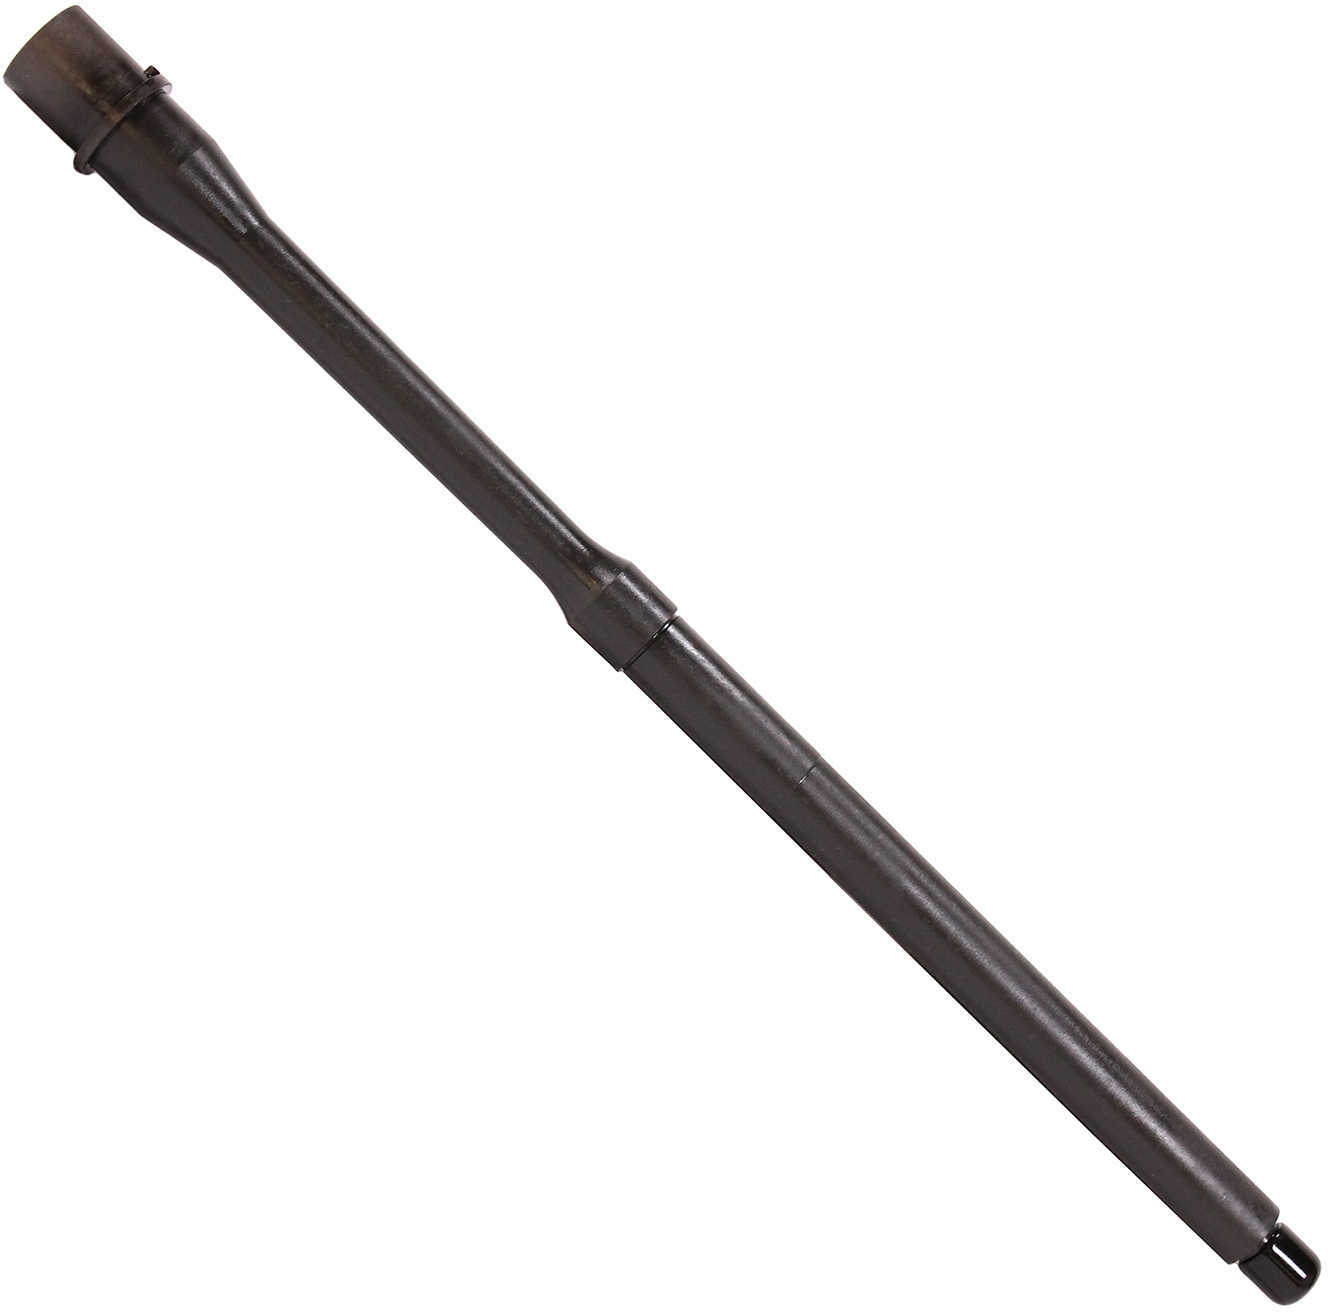 FN 20-100039 AR-15 5.56X45mm Nato 16" Button Rifled M16 Profile Carbine Length Gas System, Black Phosphate Cold Hammer F